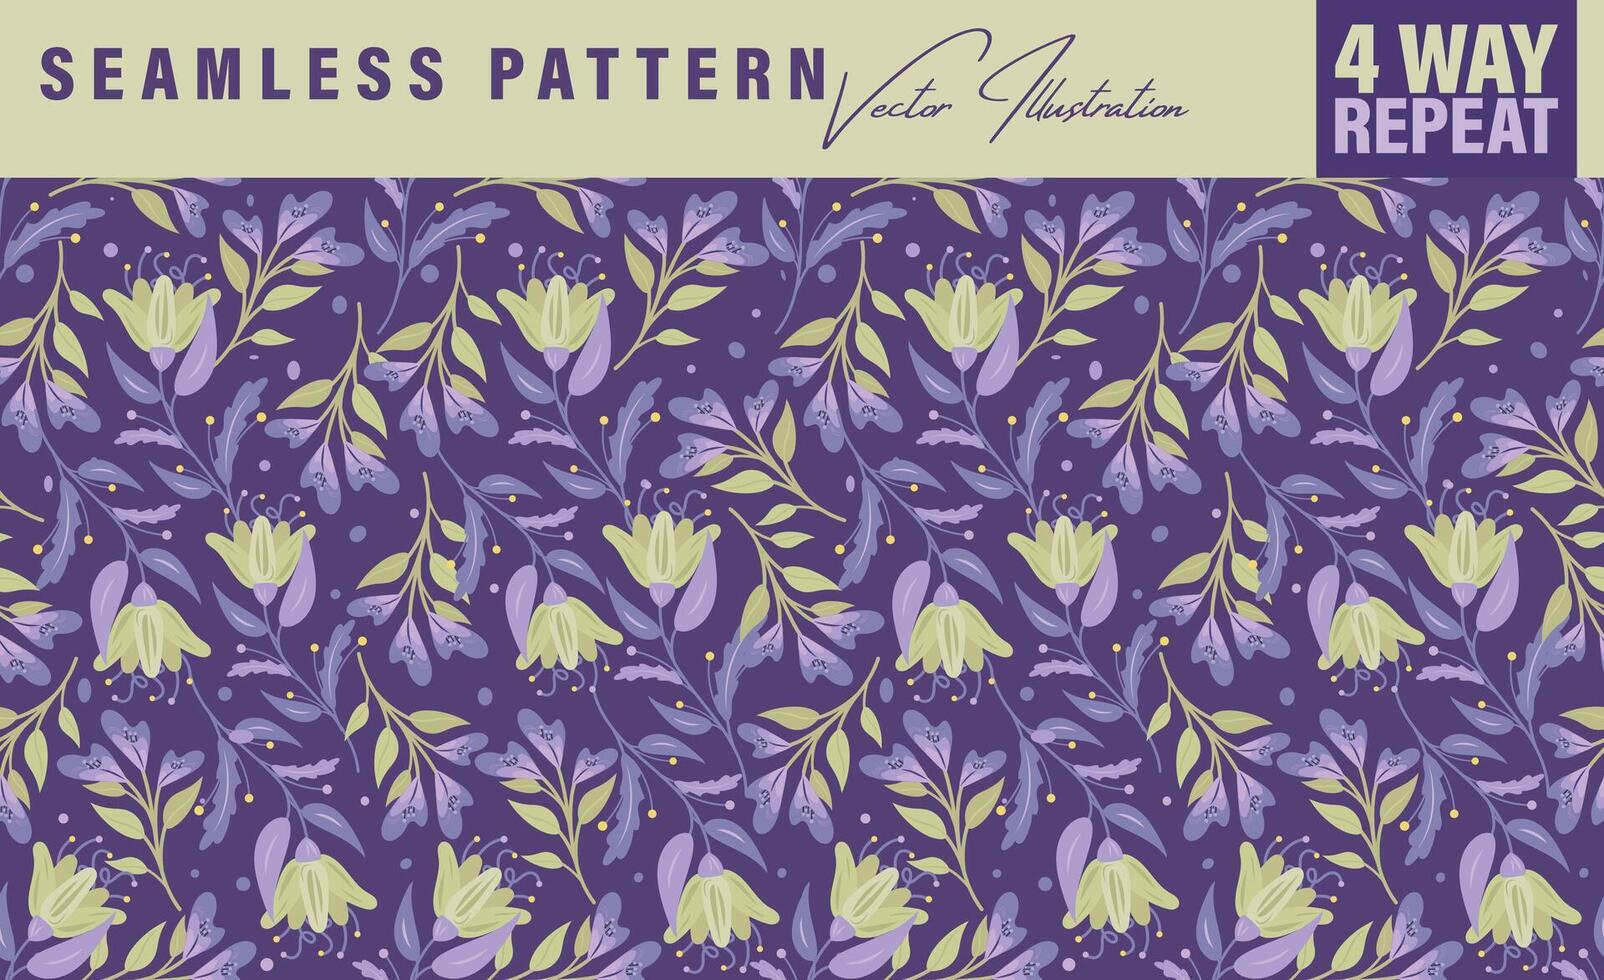 Seamless floral repeat pattern in Spring color palette. Four-way-repeat vintage pattern for fabric, book cover design, wrapping paper, bags, vintage backgrounds etc vector